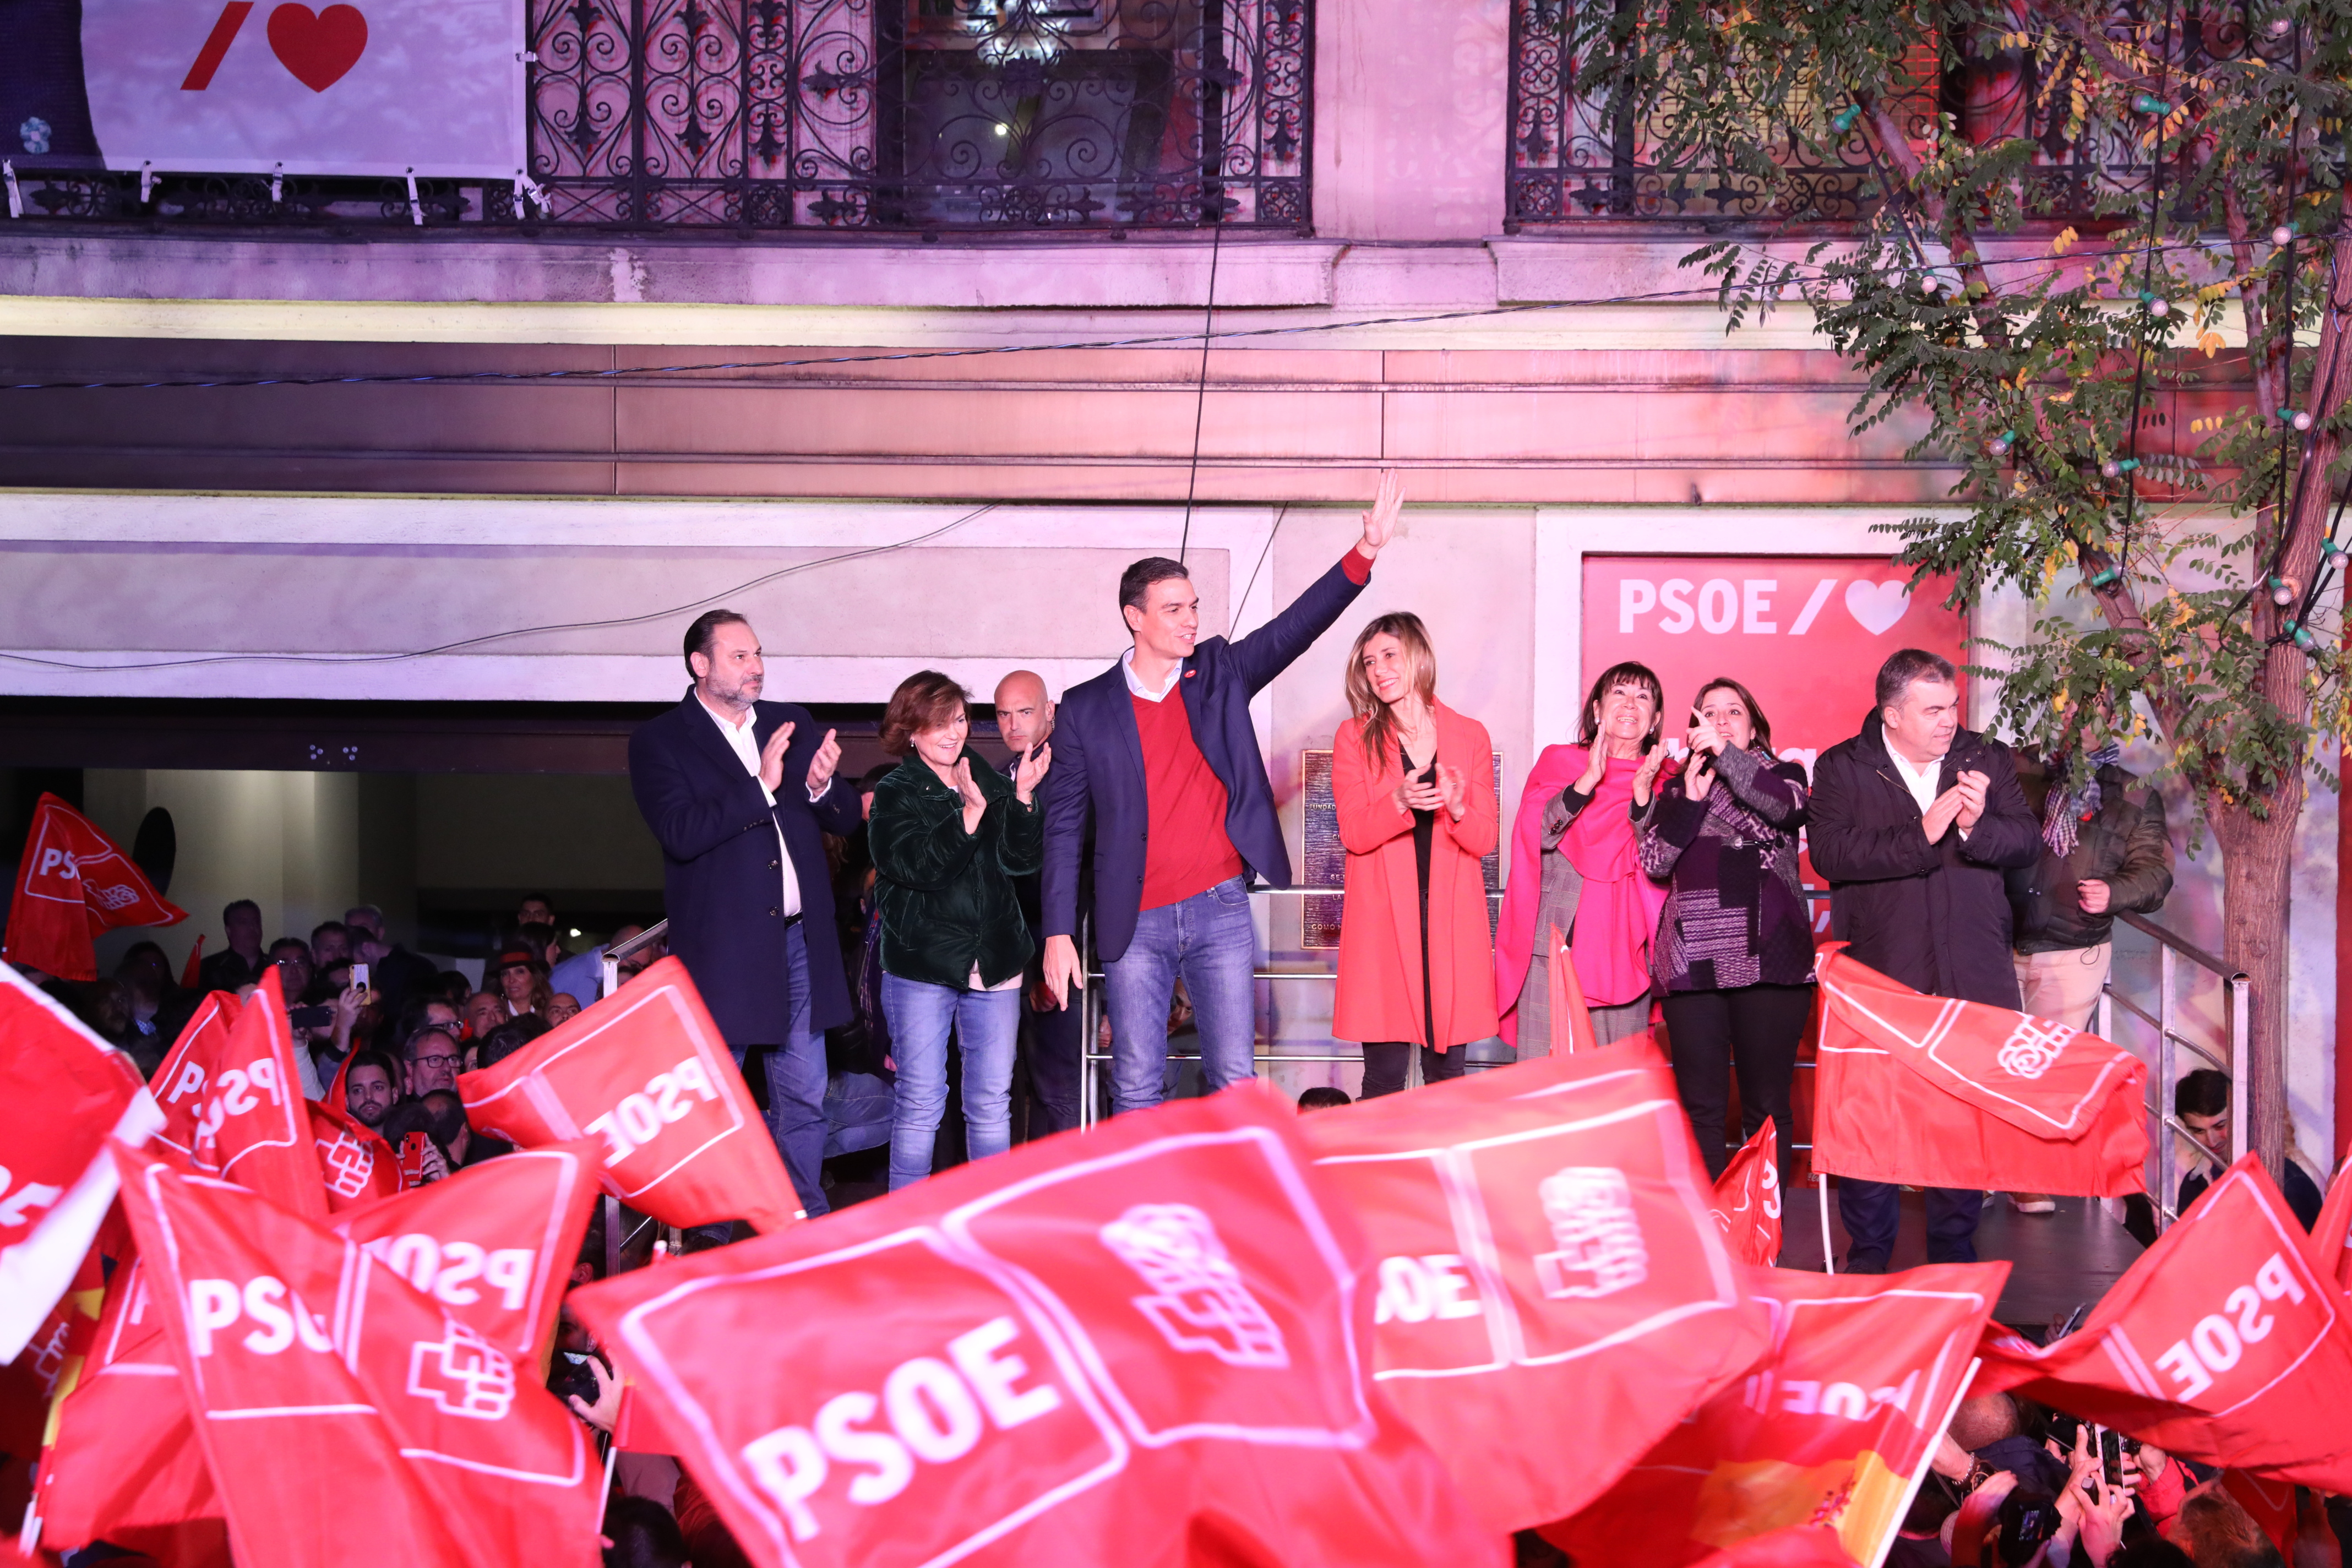 Pedro Sánchez celebrates his victory in the Spanish election at the Socialist party's headquarters in Madrid (by ACN)